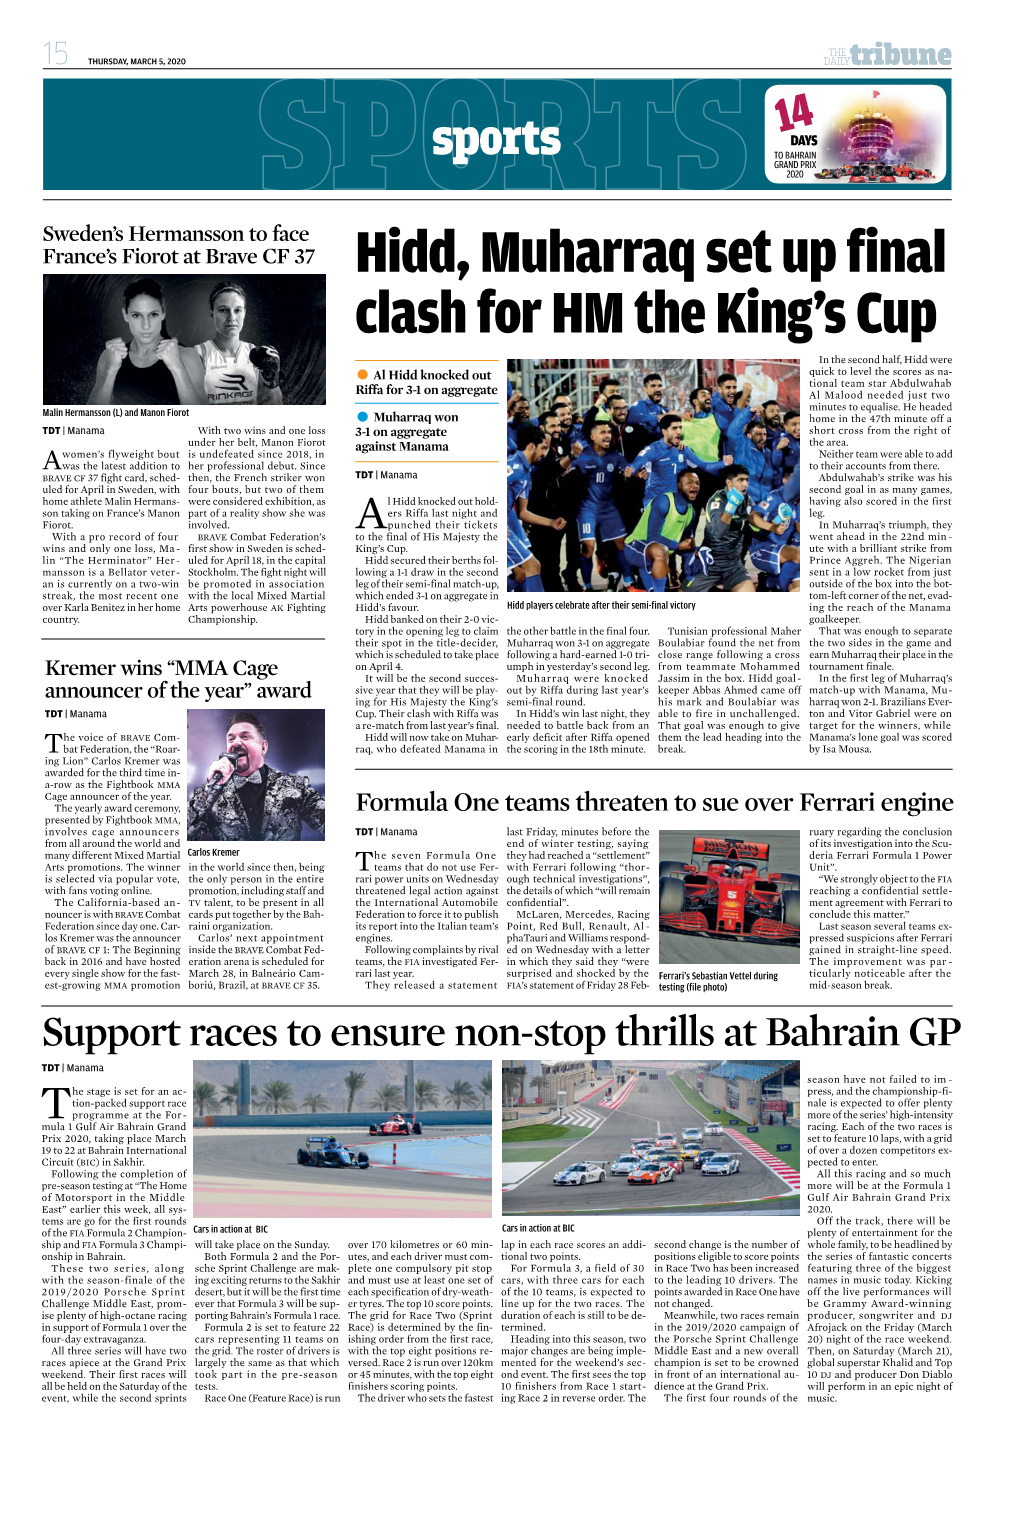 Hidd, Muharraq Set up Final Clash for HM the King's